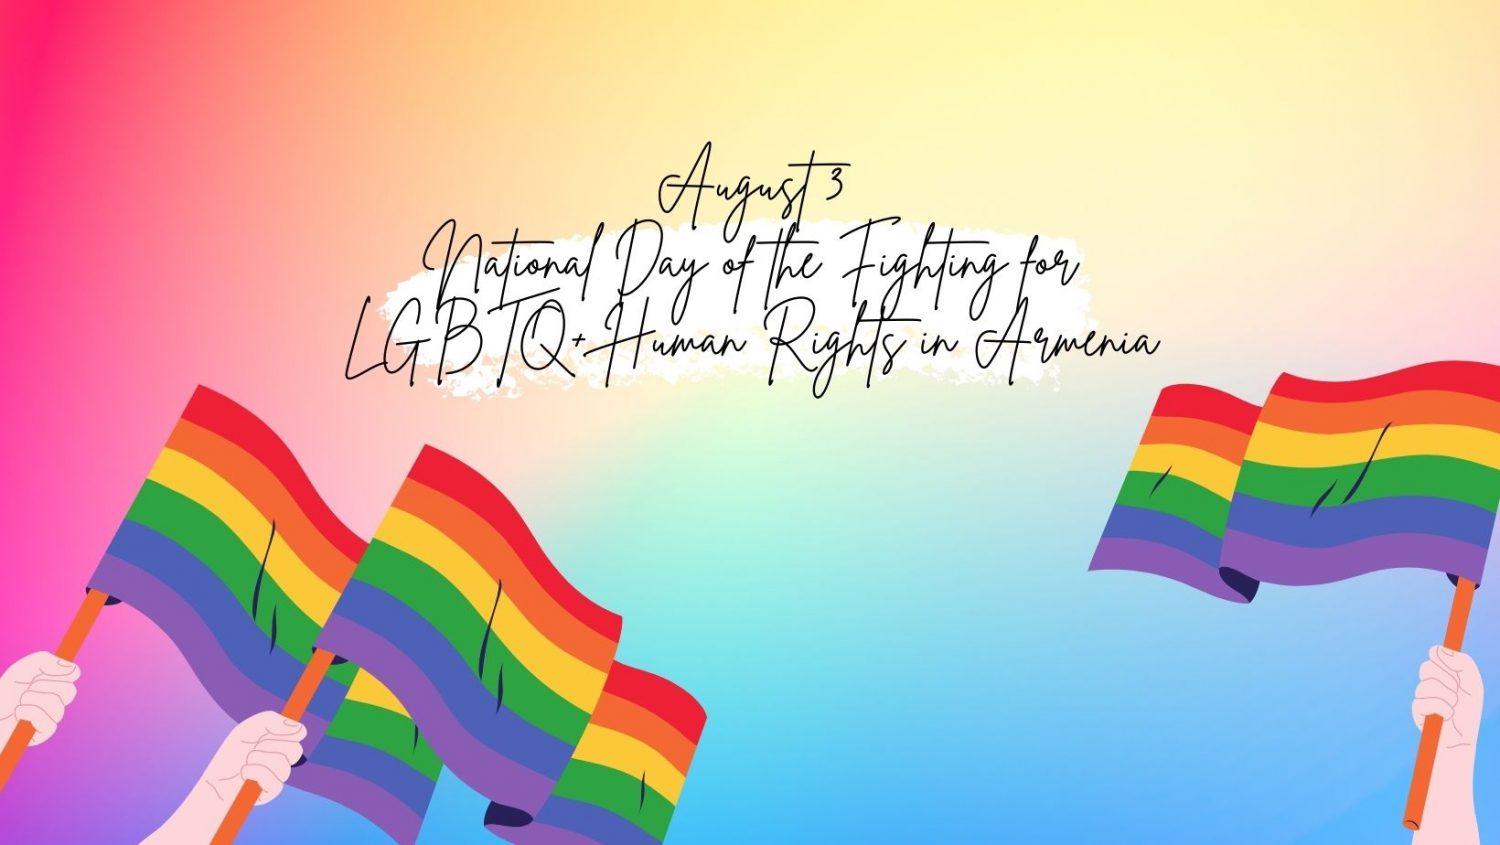 National Day of the Fighting for LGBTQ + Human Rights in Armenia